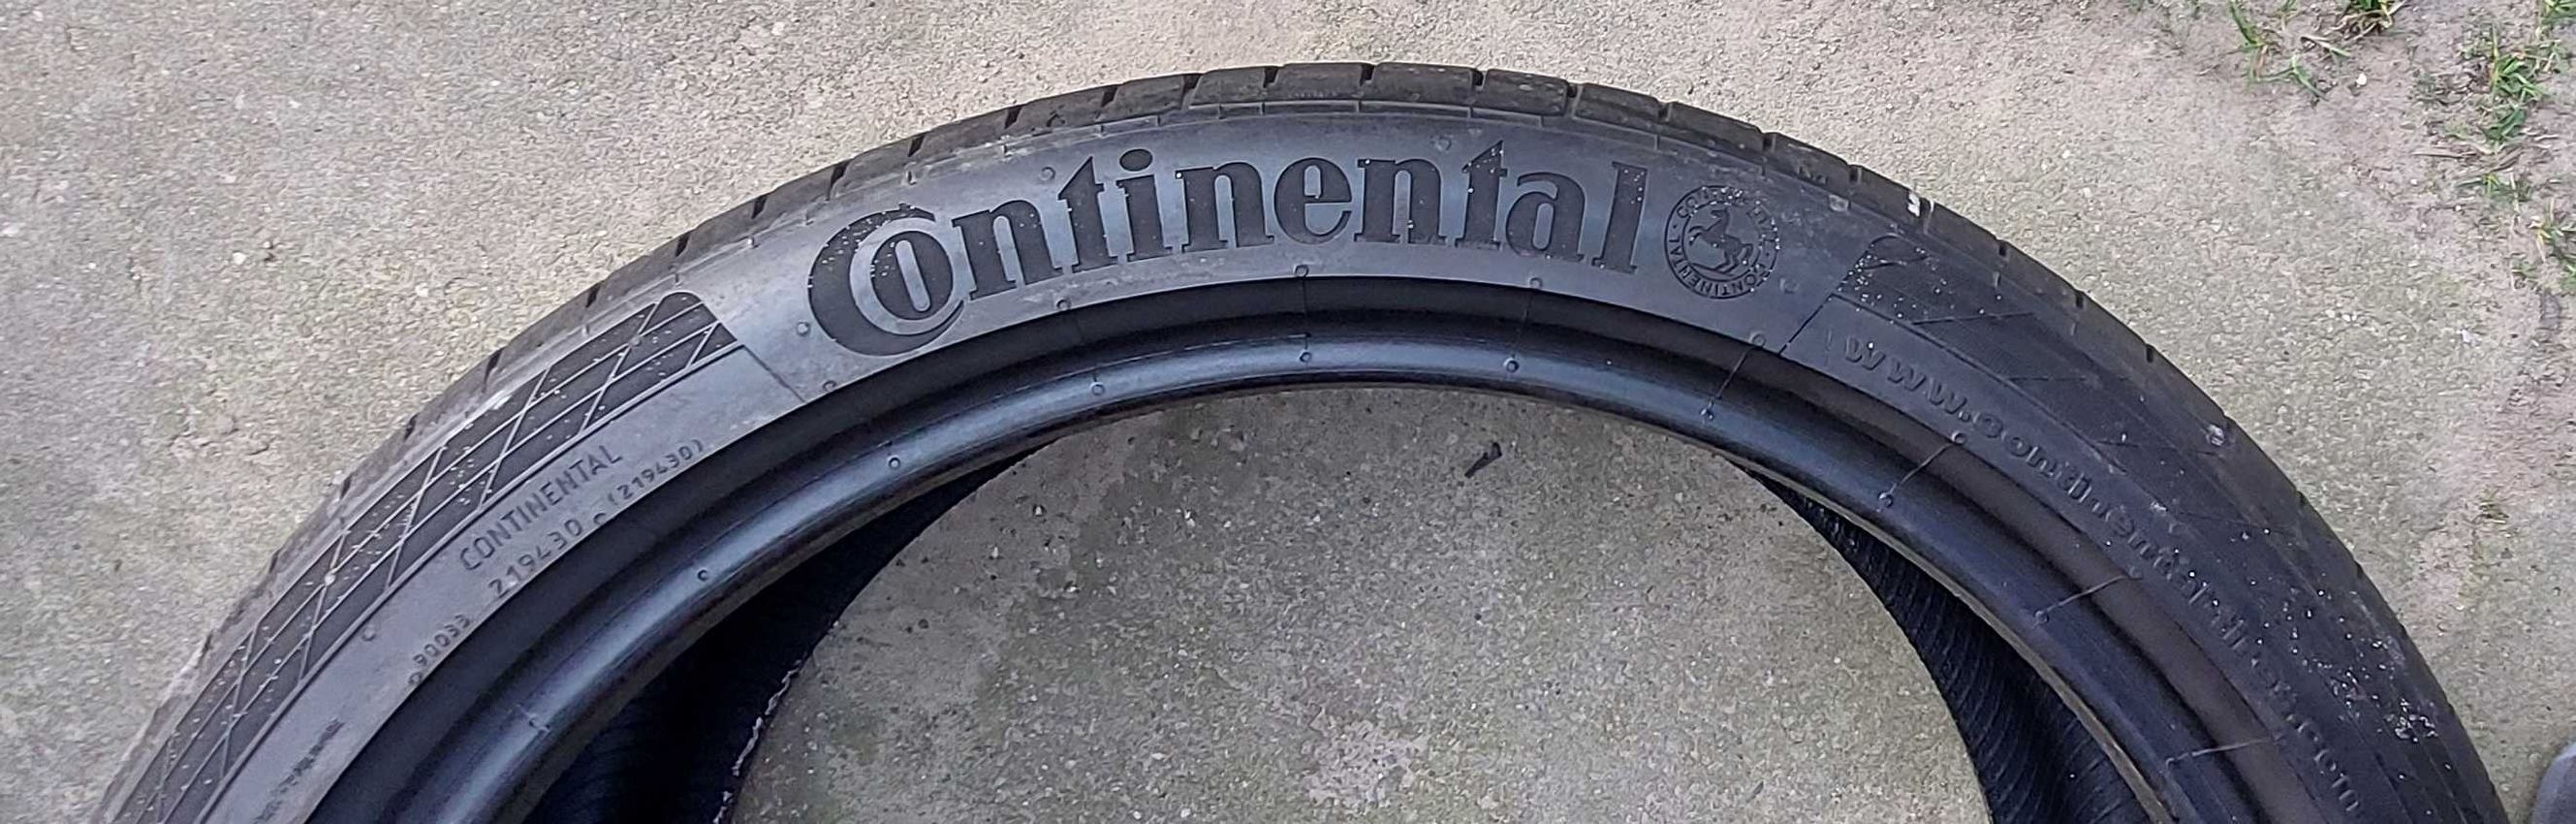 255/35/19 Continental ContiSportContact 5P !!! 6 mm !!!